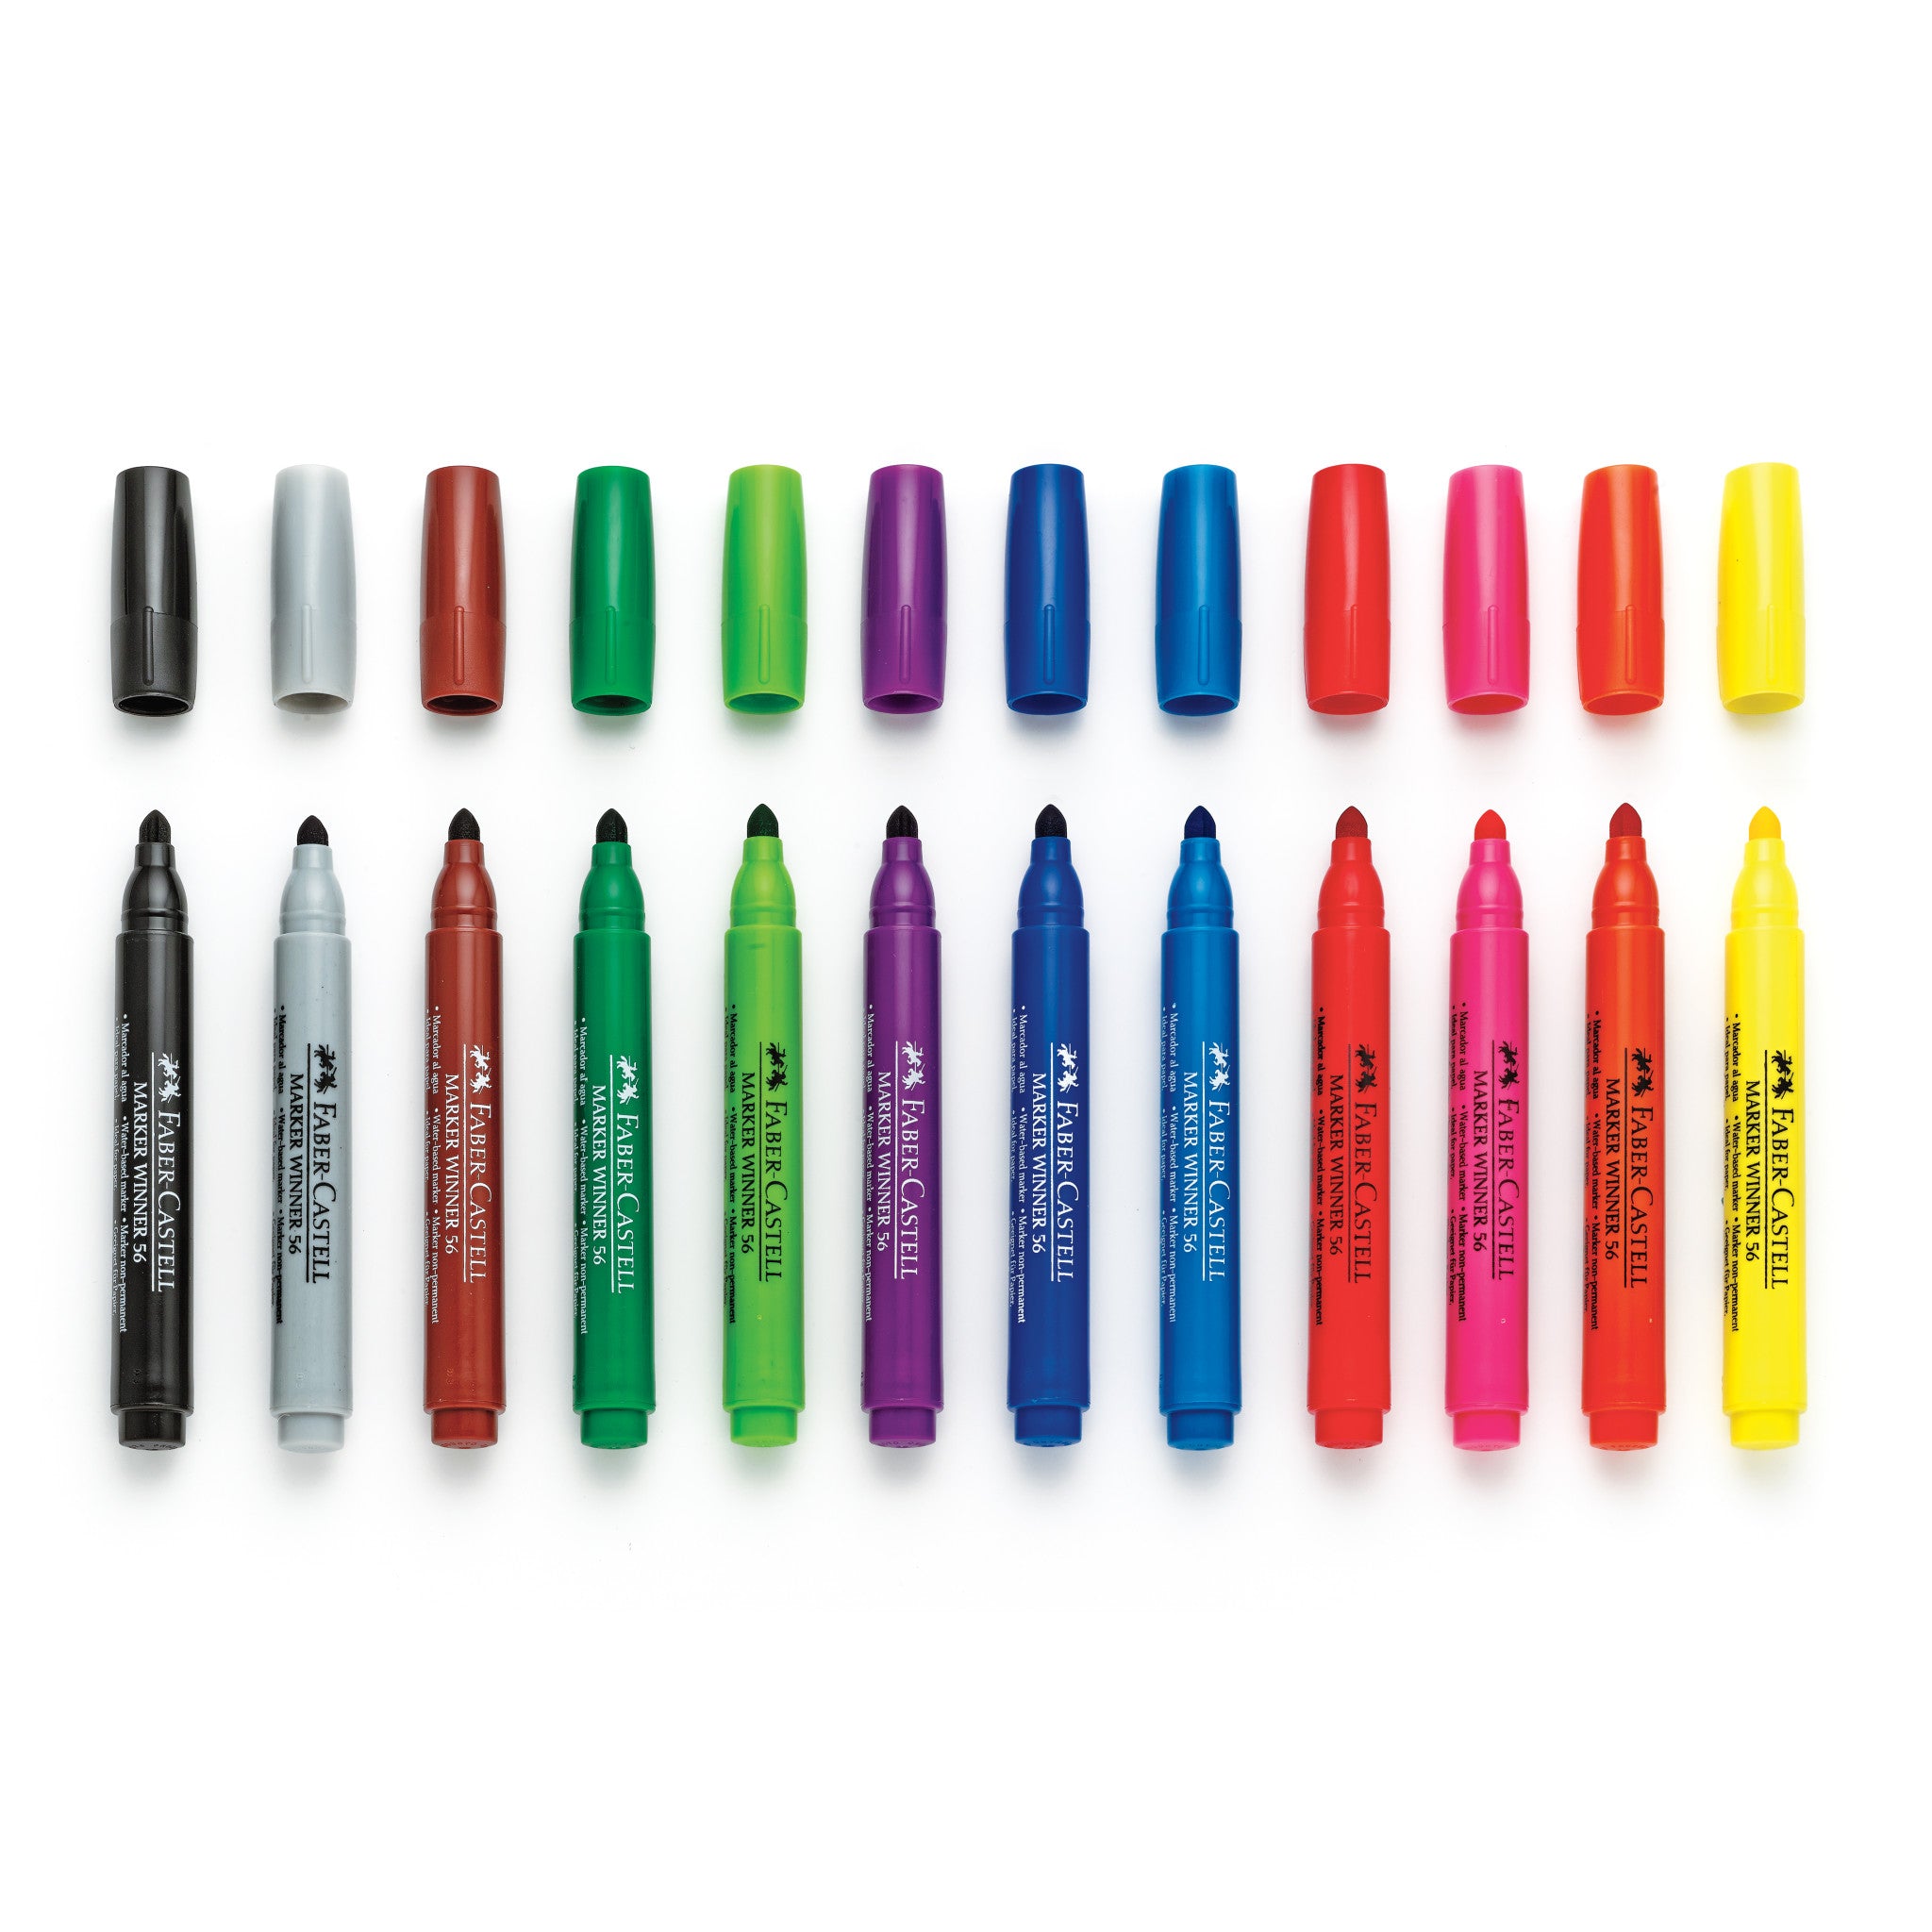 Faber-Castell Duo Tip Washable Markers 12 Set